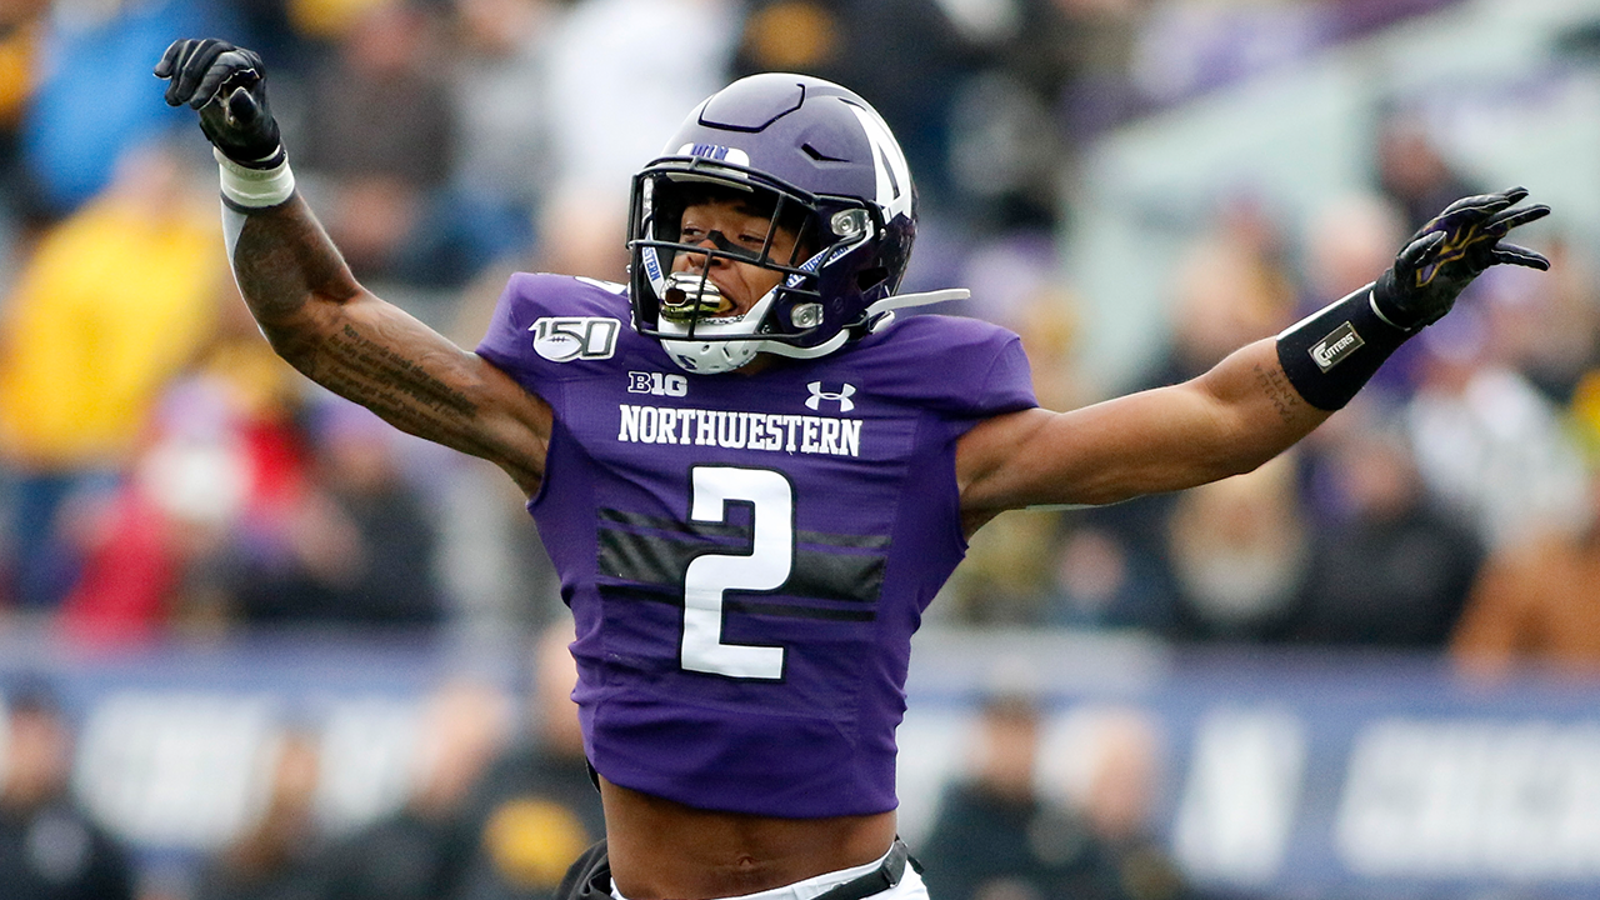 Cleveland Browns at depth at CB by selecting Northwestern’s Greg Newsome II 26th overall